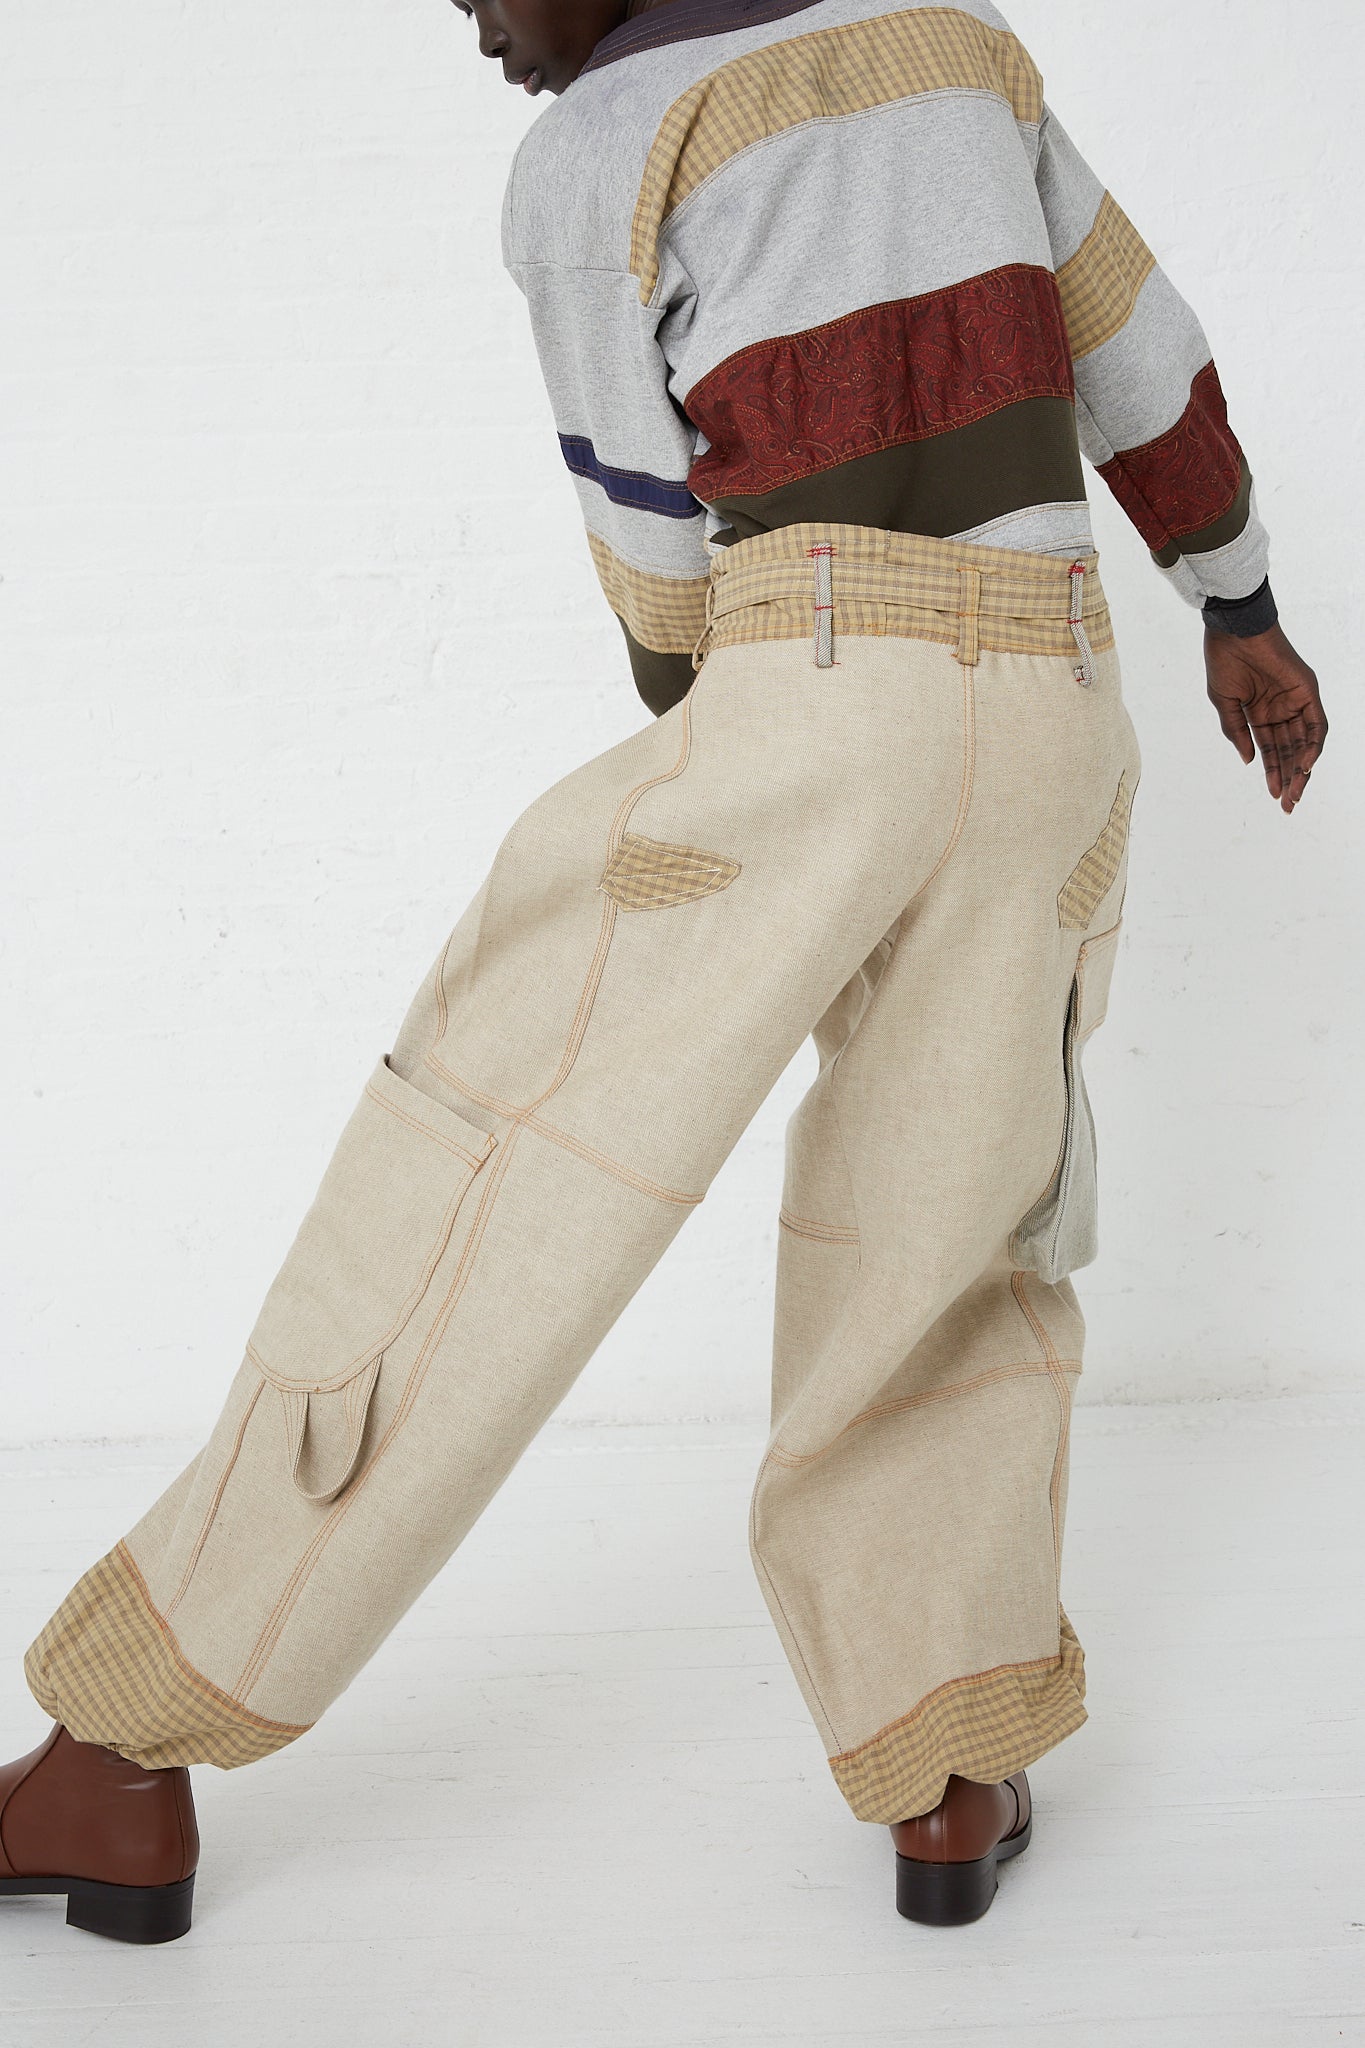 A model wearing SC103 Check Cotton Jupiter Pant in Tent with an oversized fit sweater. Available at Oroboro Store.